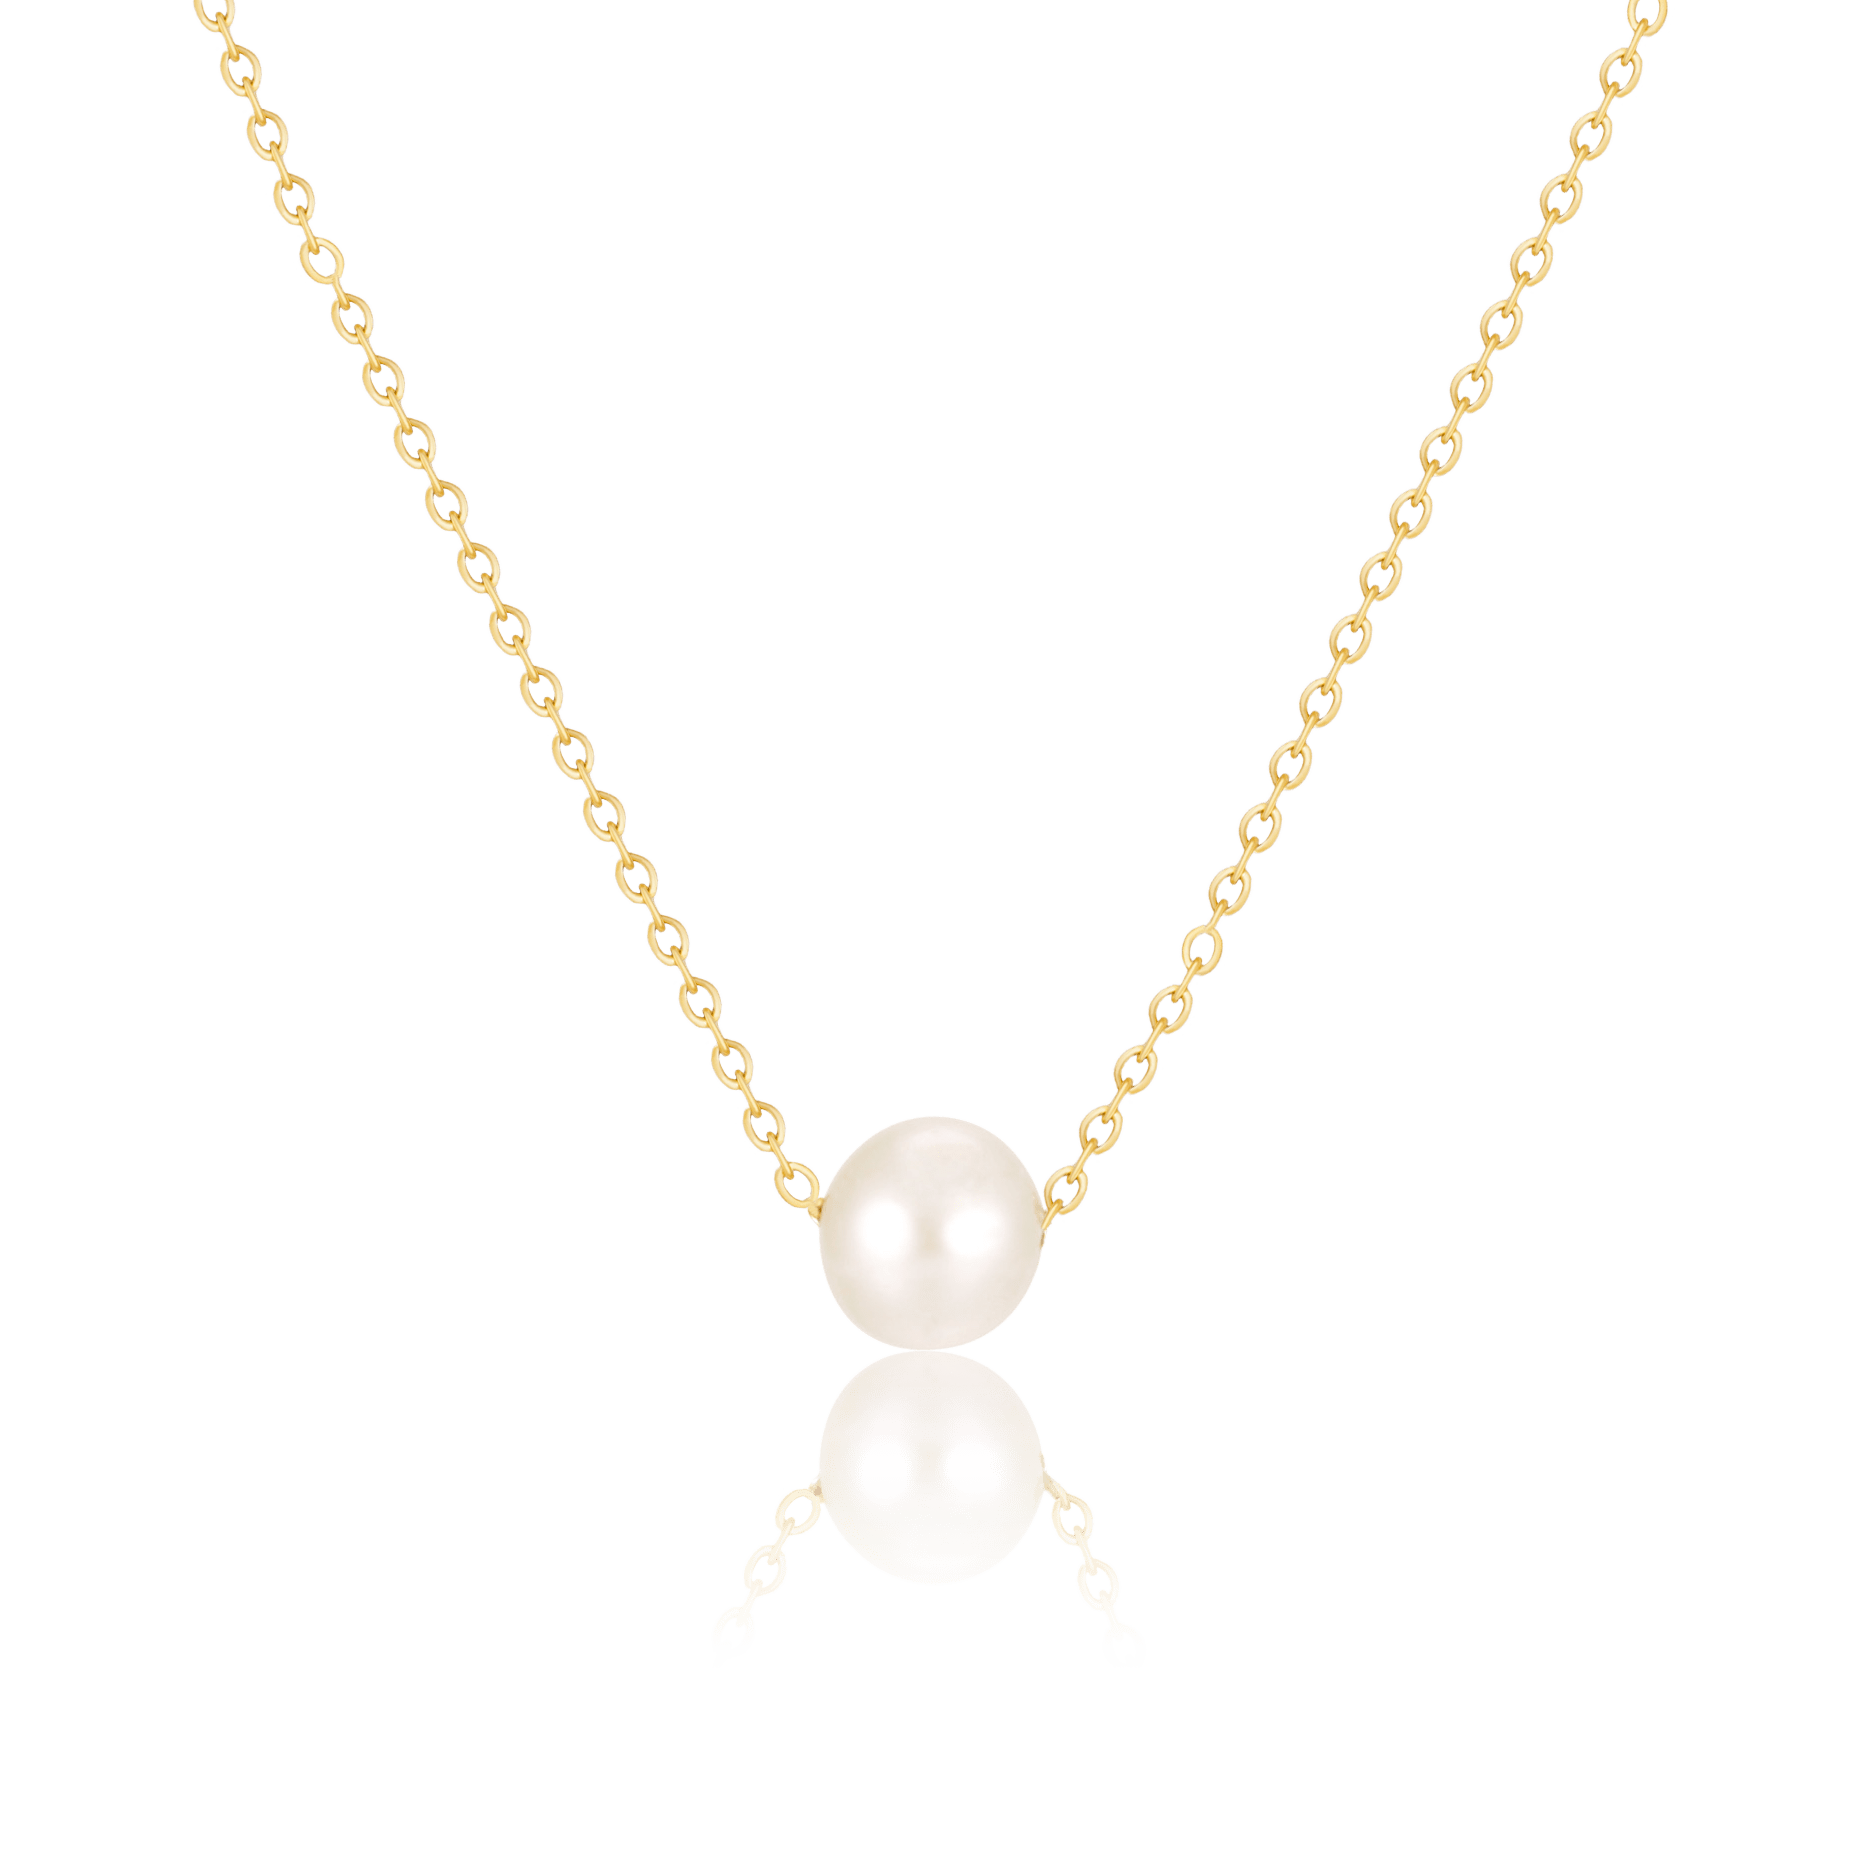 bianco rosso Necklaces Gold Chain Pearl Necklace cyprus greece jewelry gift free shipping europe worldwide